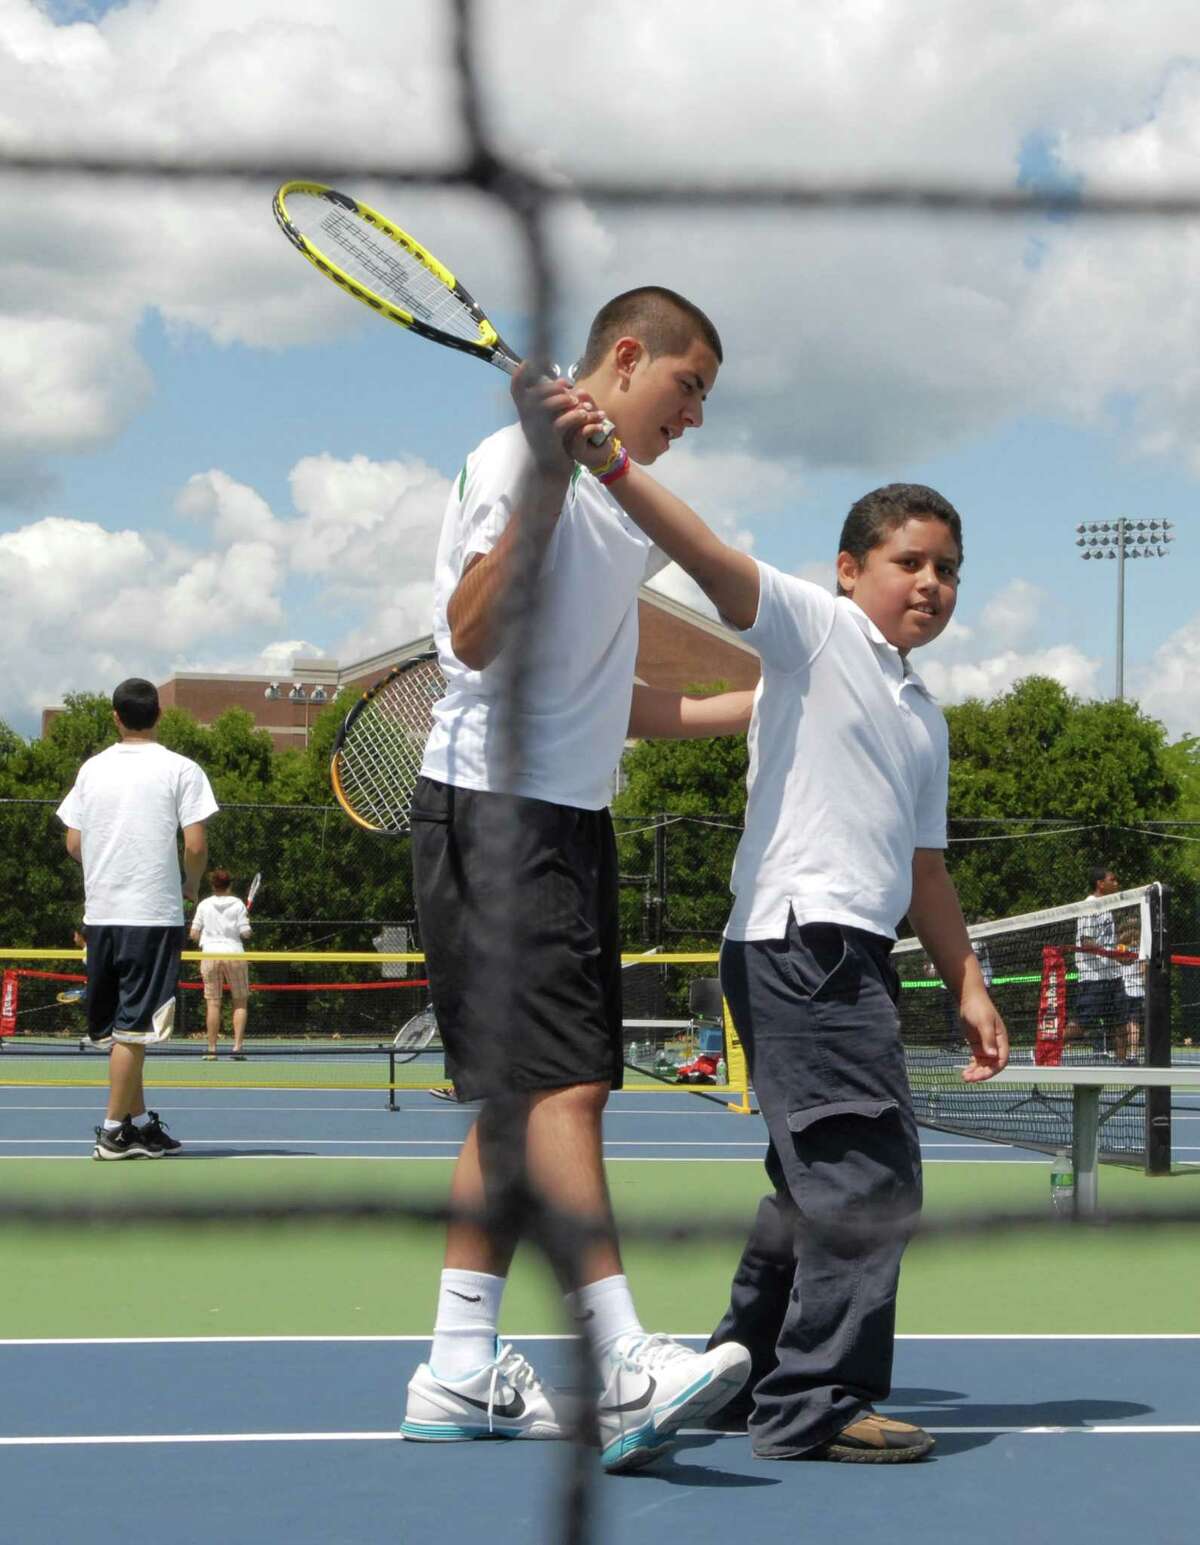 Photography by PETER HVIZDAK ph2104 #2162 New Haven, Connecticut- June 8, 2010: Tennis player Giovanni Emestica of New Haven, 18, a Career High School senior and a member of the school's tennis team, left, teaches Juan Carlos Lopez, 8, of the 4th-grade at the Fair Haven School during the annual Pilot Pen Tennis Tournament free tennis clinic for New Haven public school students from third to fifth grade . Emestica interest in tennis started at the tournament's clinic when he was in grade school.